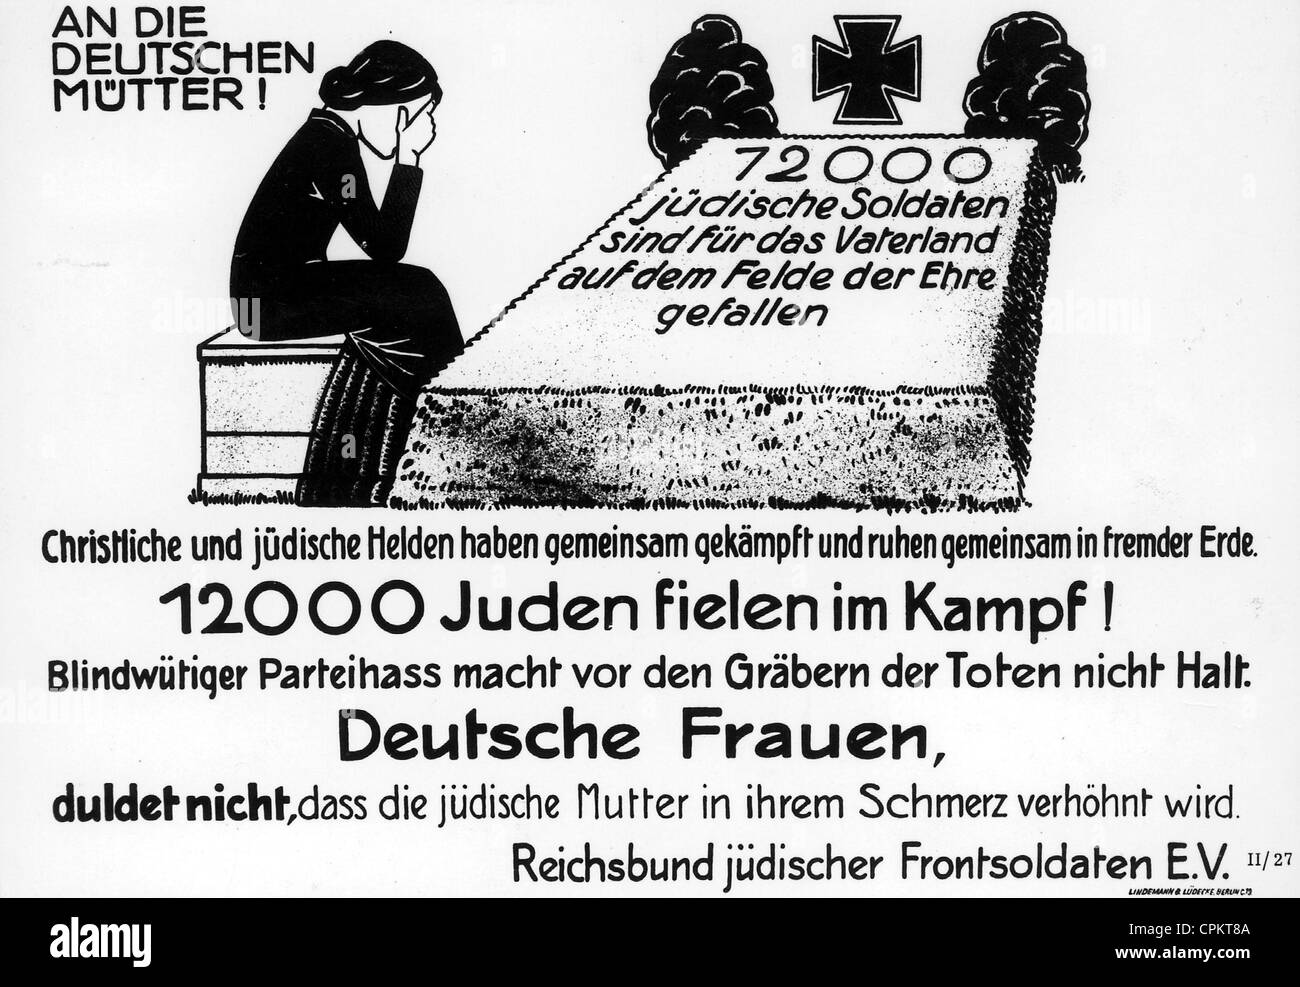 A campaign poster issued by the Reichsbund Juedischer Frontsoldaten, appealing to the German public before the upcoming Stock Photo